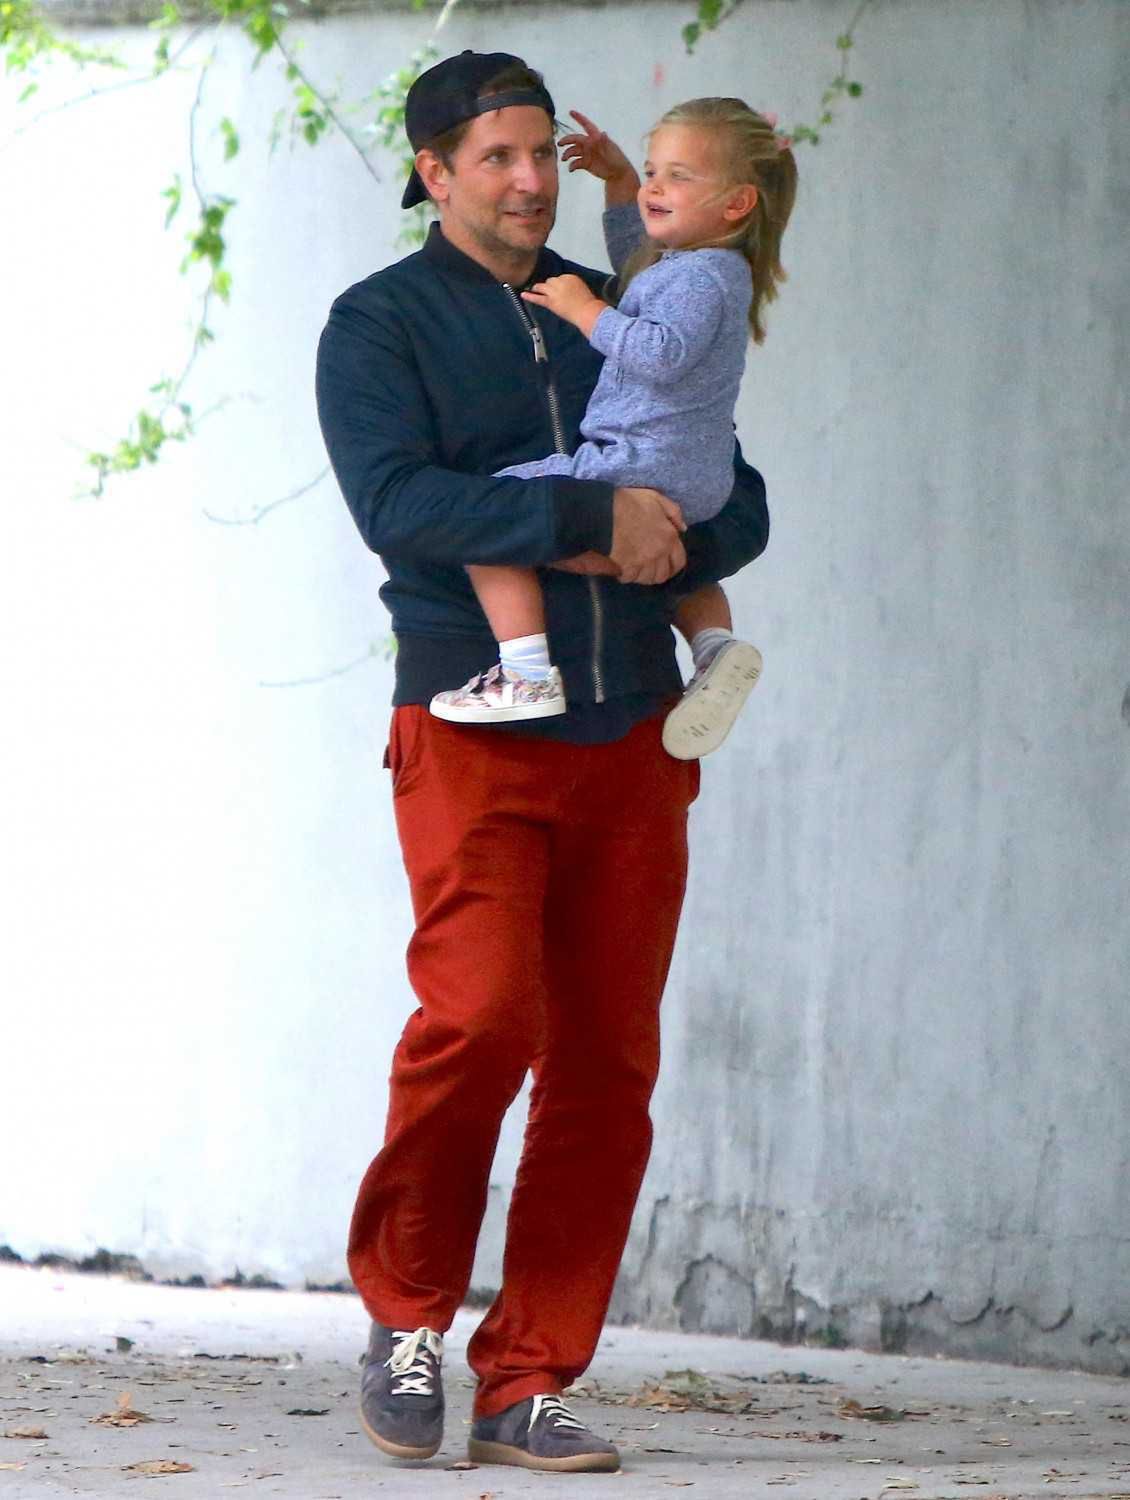 Please hide the child's face prior to the publication - Bradley Cooper and his cute little daughter Lea De Seine walking in the West Village in New York City, NY, USA on October 8, 2019. NO CREDIT a3